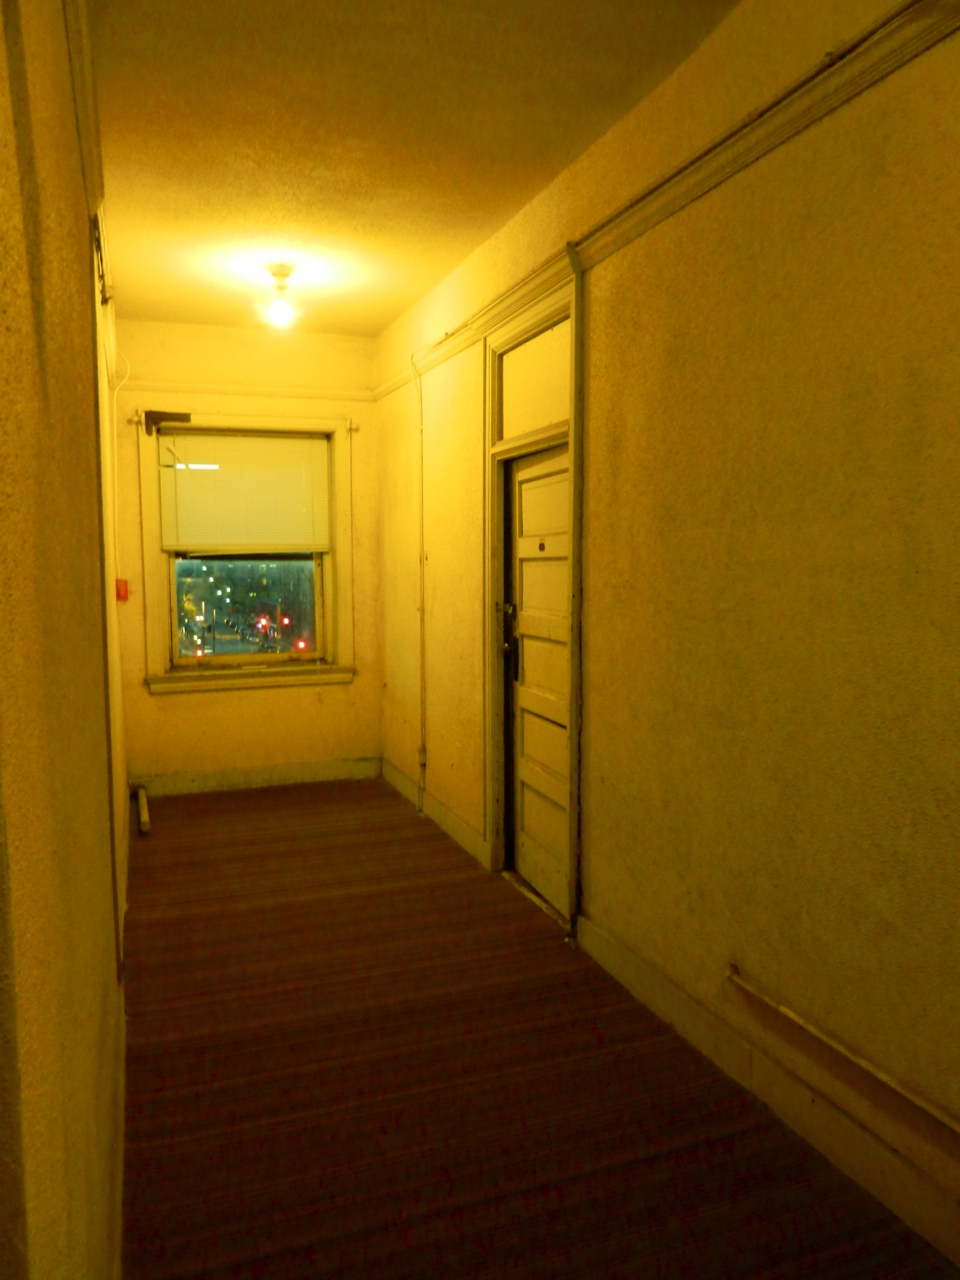 a long hallway leads to a small window on the opposite side